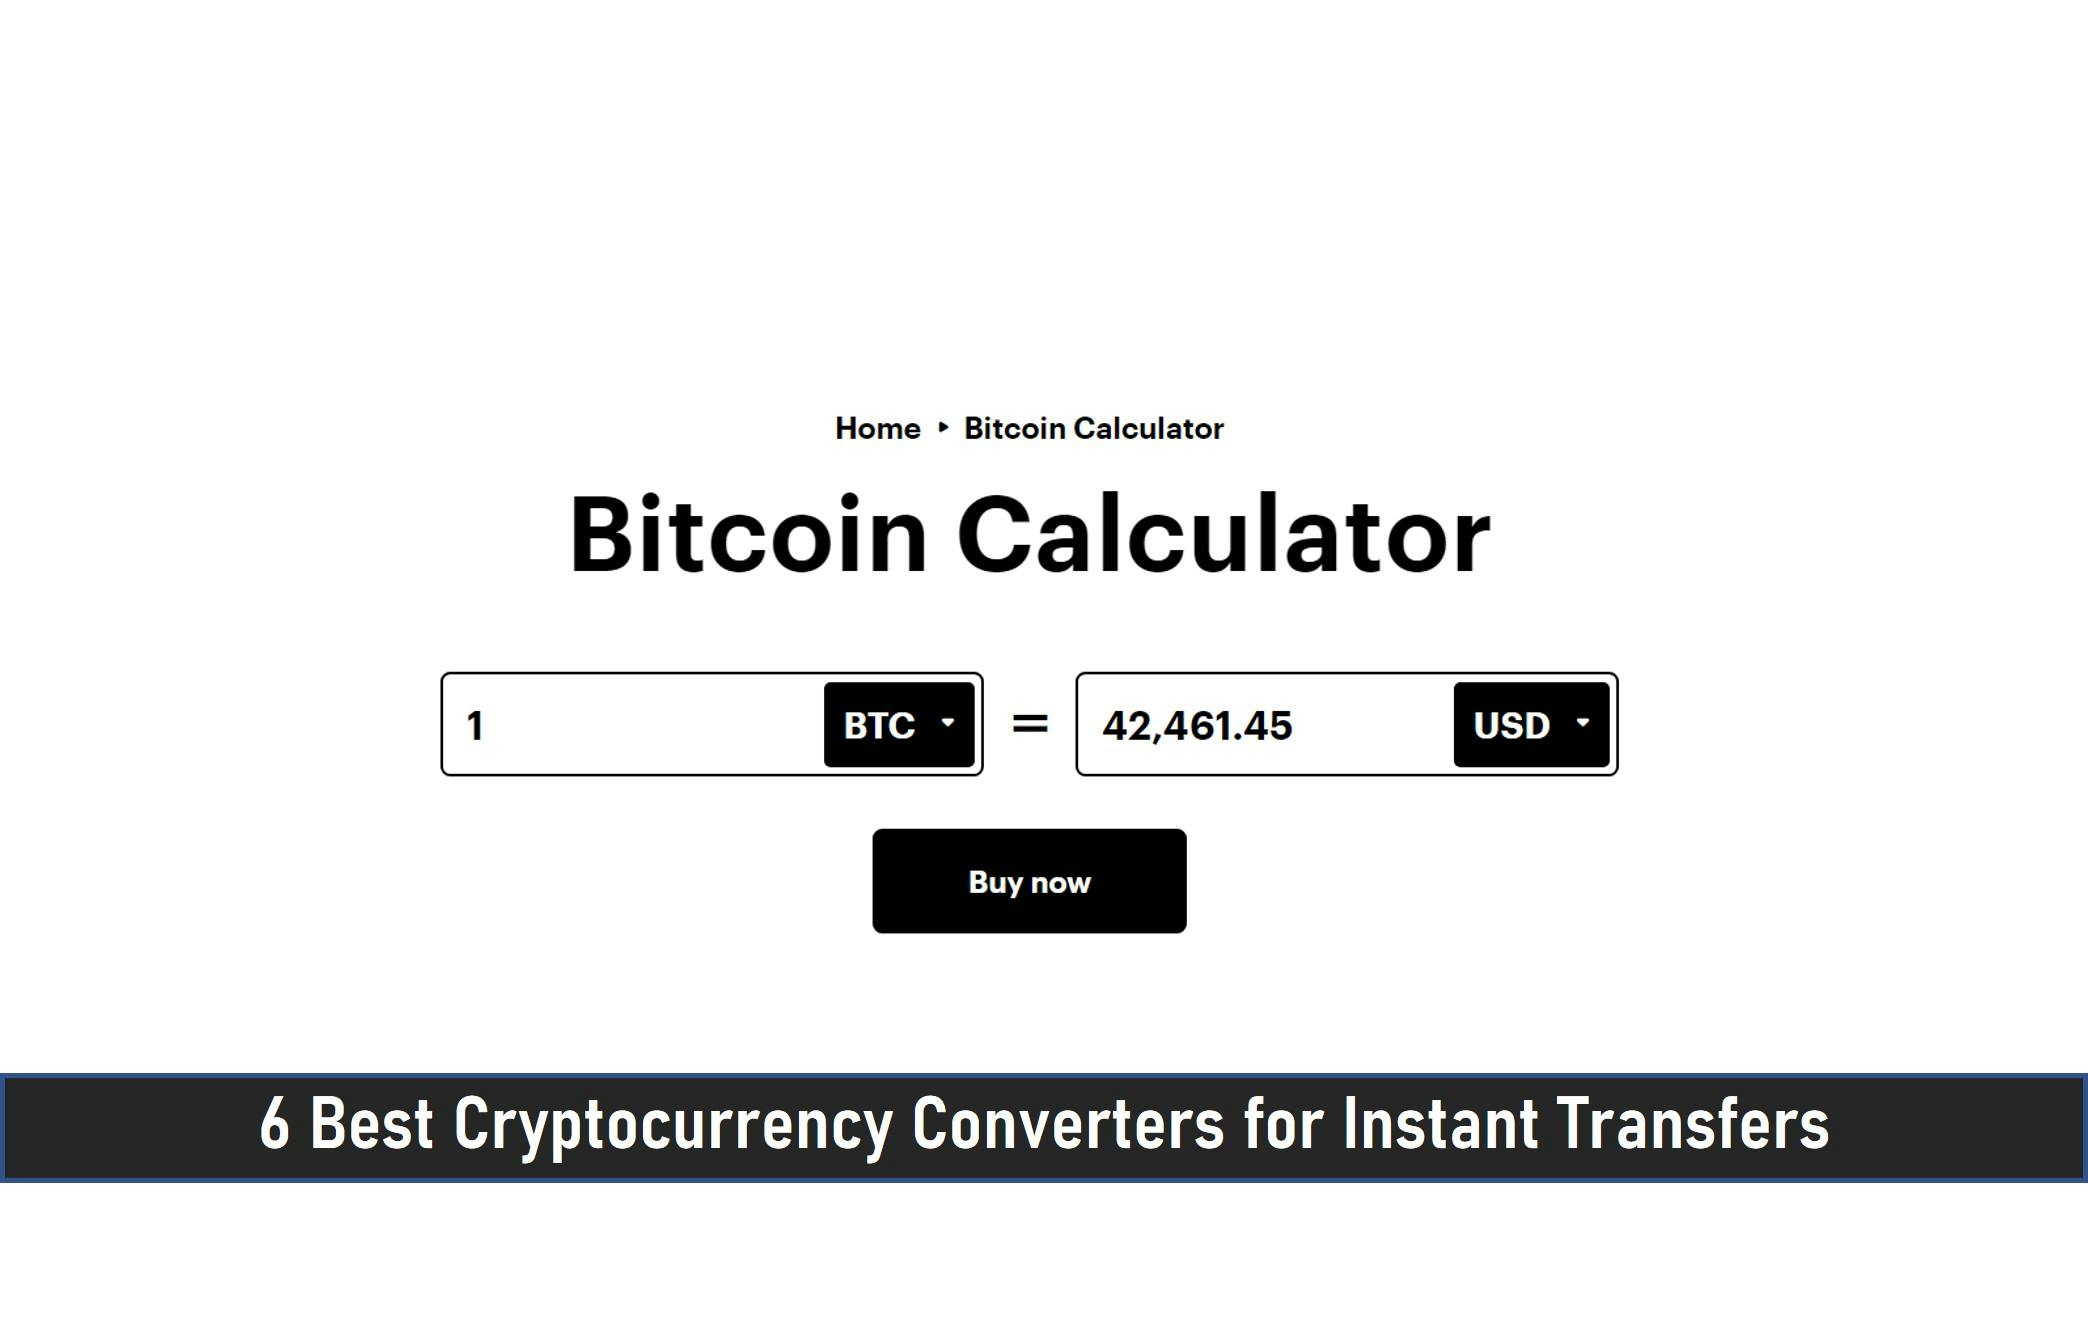 6 Best Cryptocurrency Converters for Instant Transfers